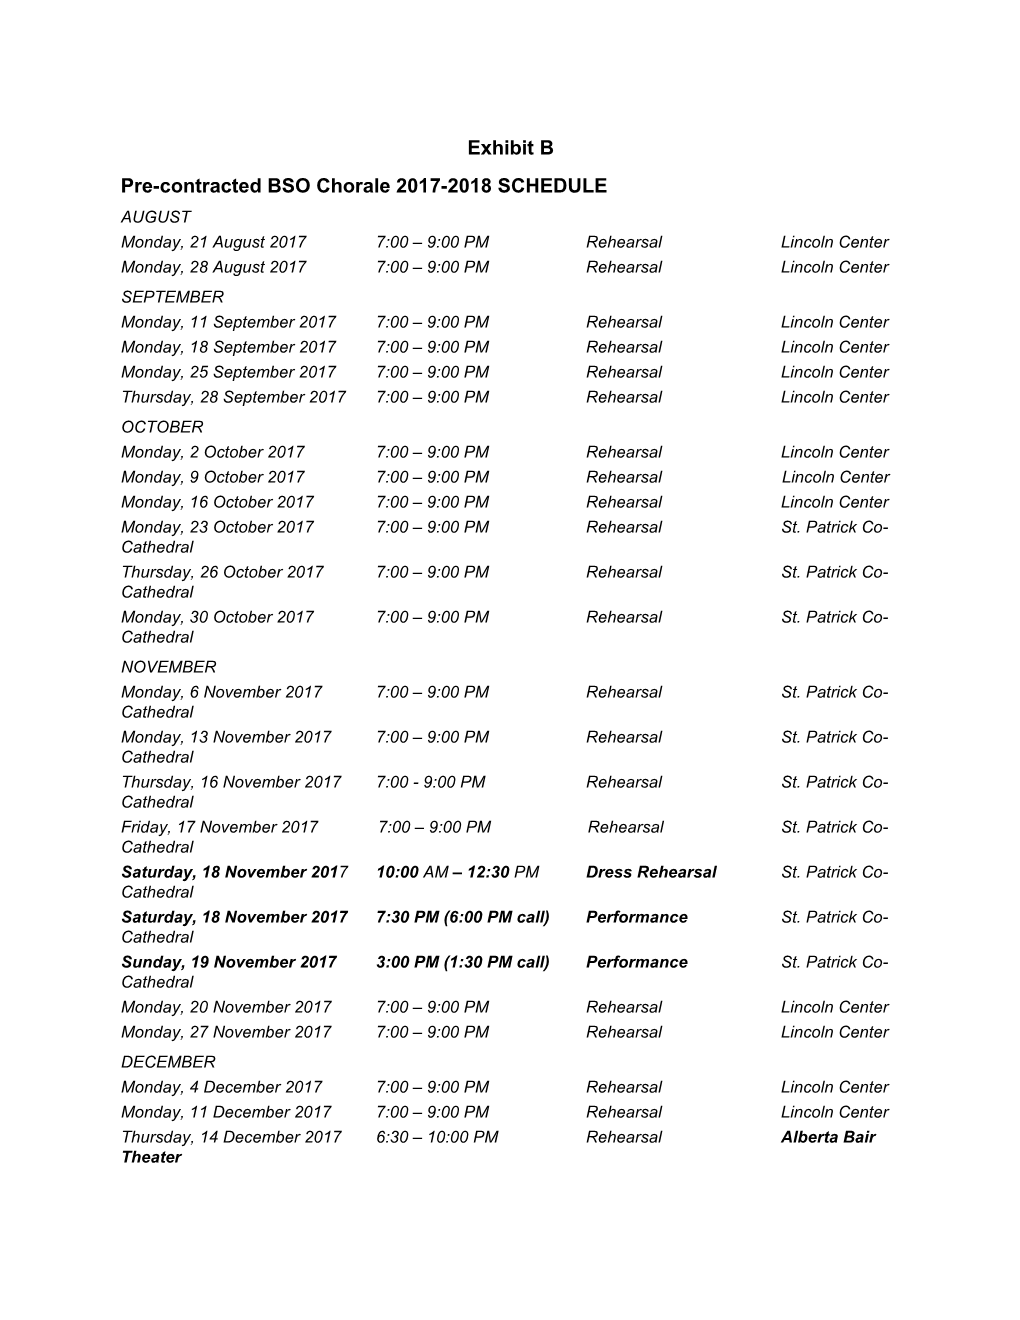 Pre-Contracted BSO Chorale 2017-2018 SCHEDULE